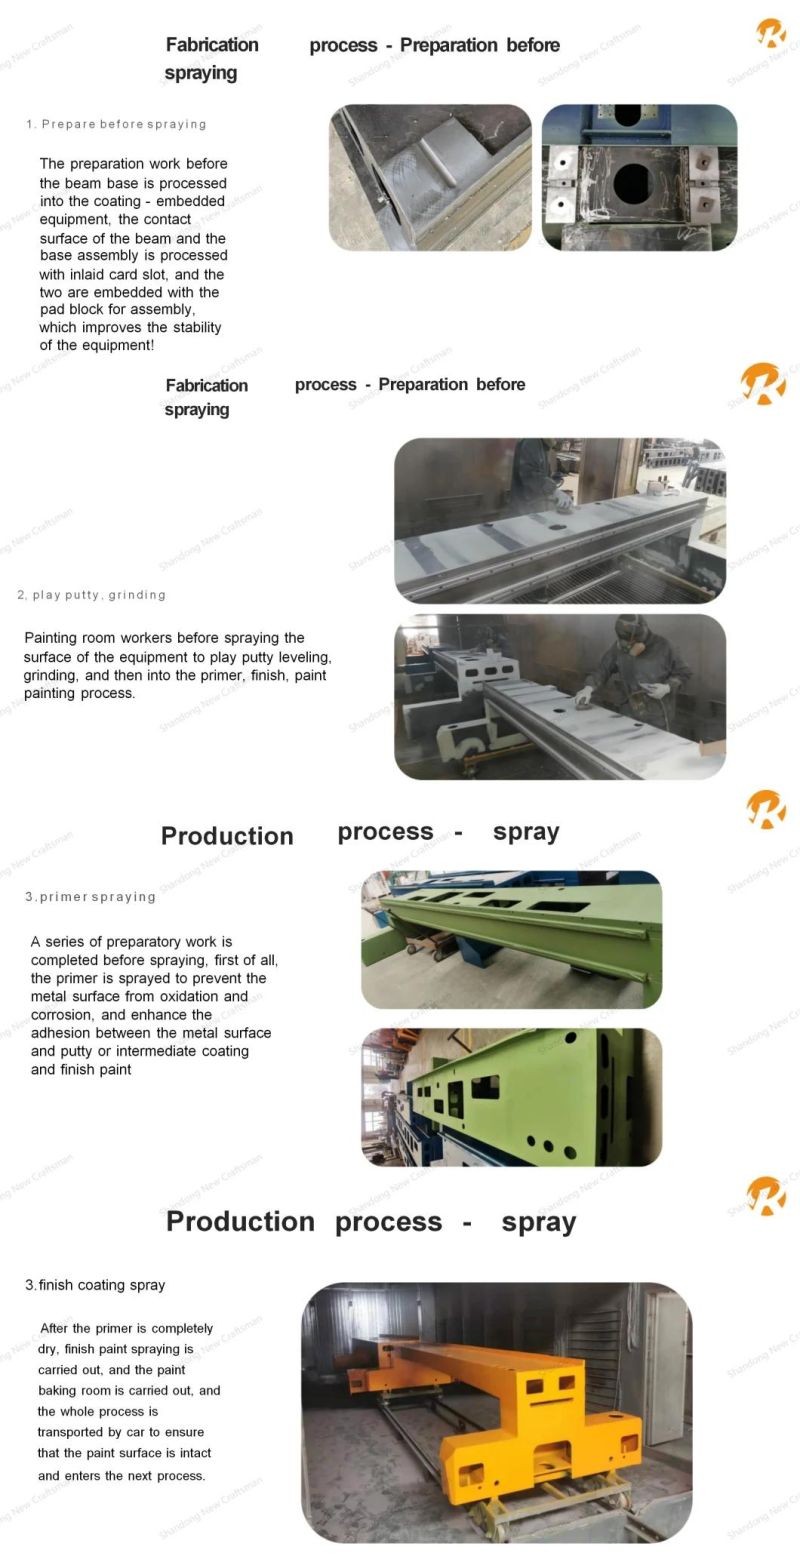 Gantry Type Carbon Stainless Steel Metal Sheet and Plate CNC Flame Plasma Cutting Beveling Machine